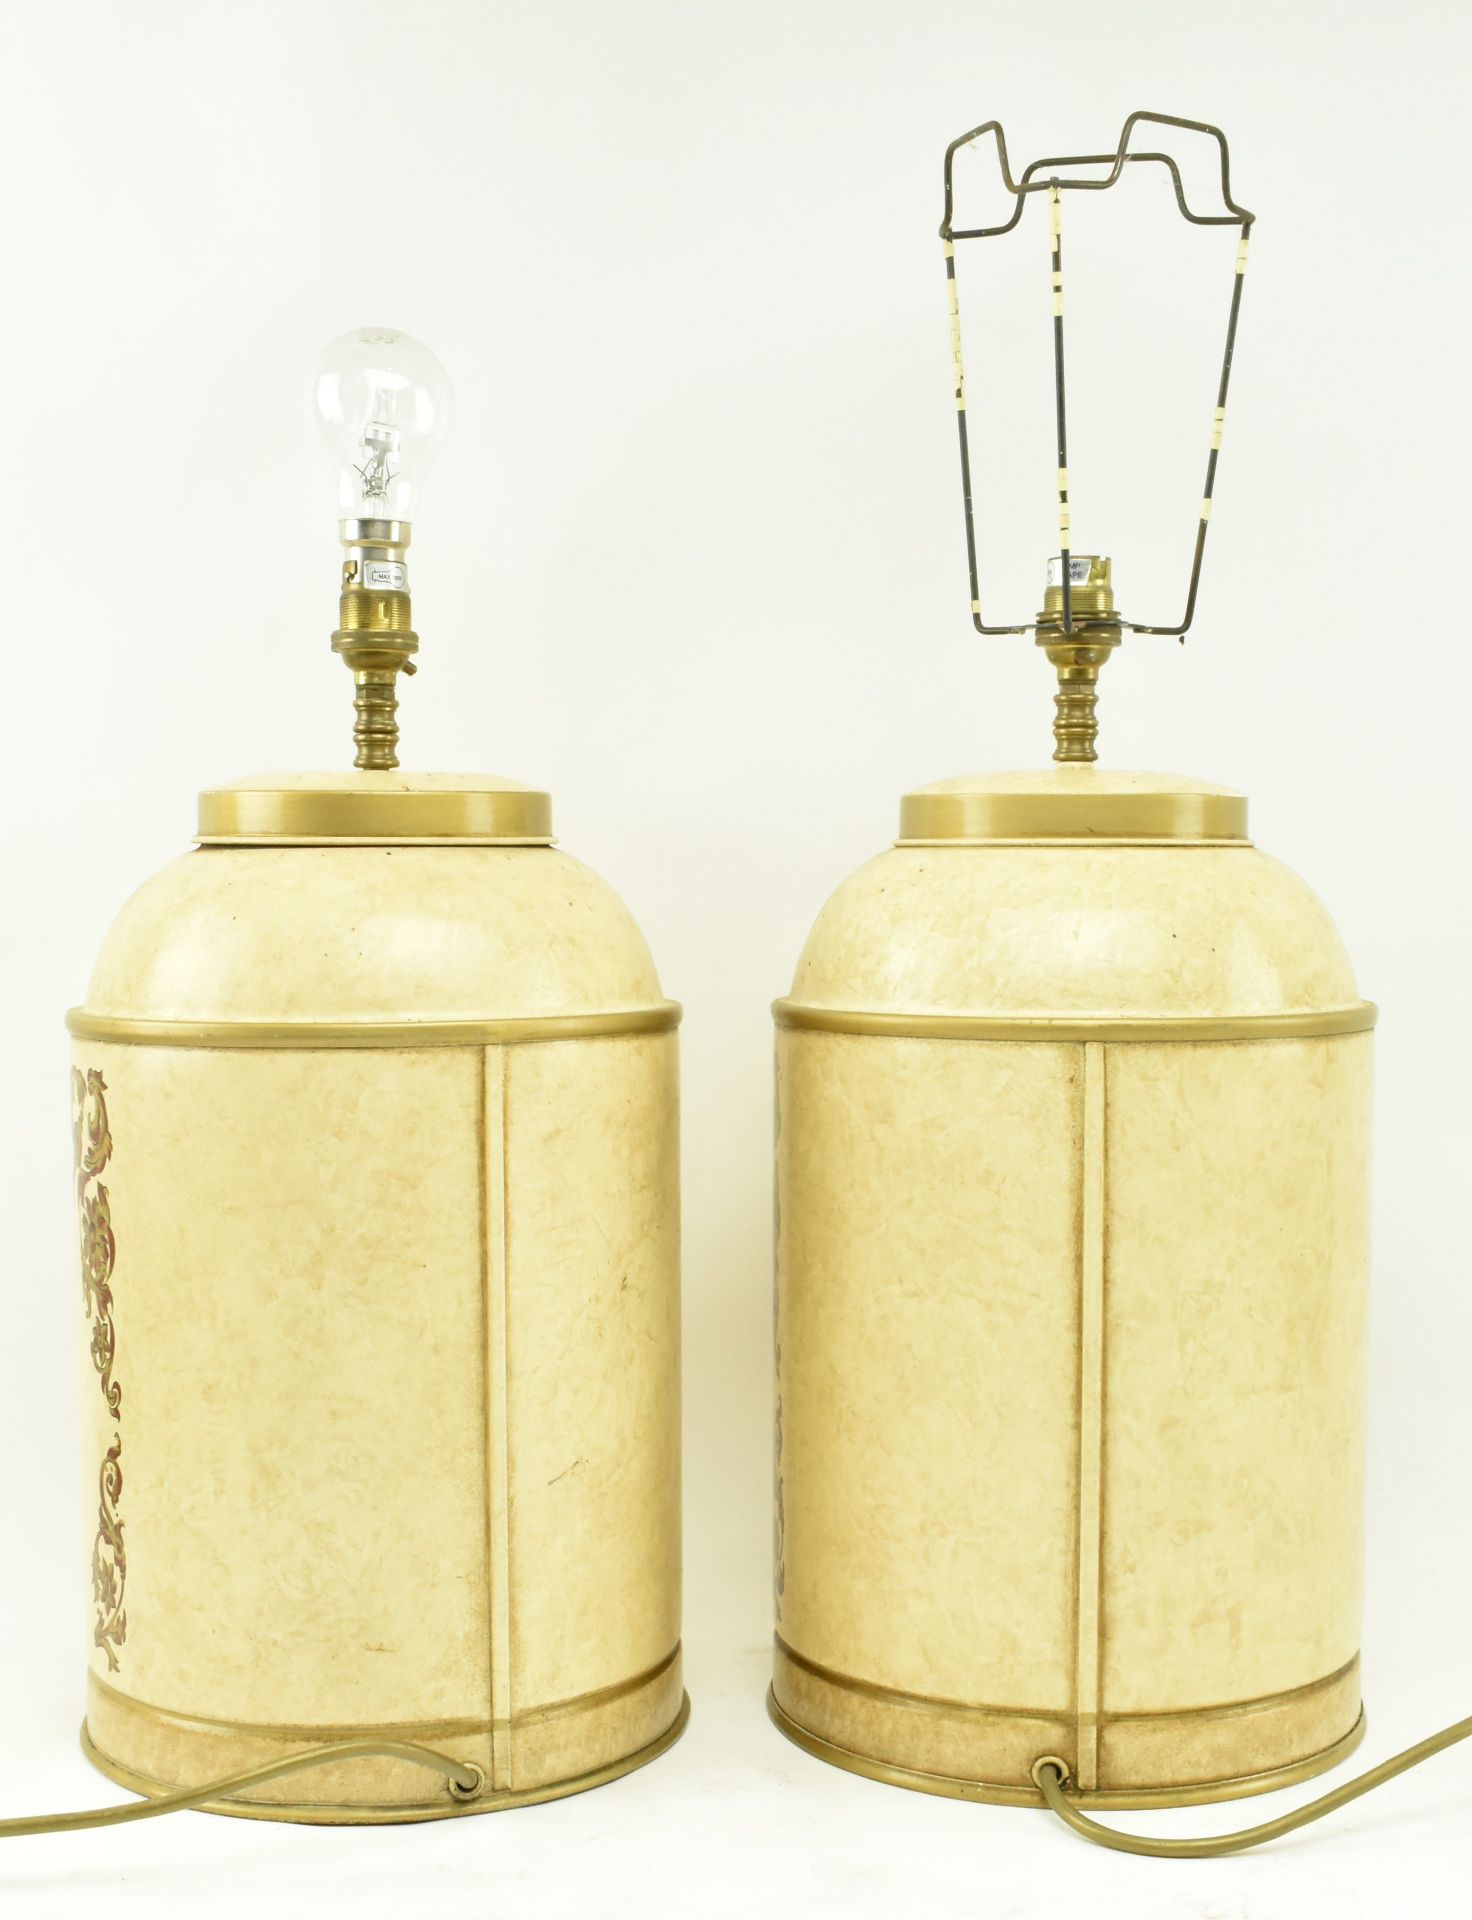 TINDLE LIGHTING - PAIR OF CONTEMPORARY TOLE DESK LAMPS - Image 6 of 6